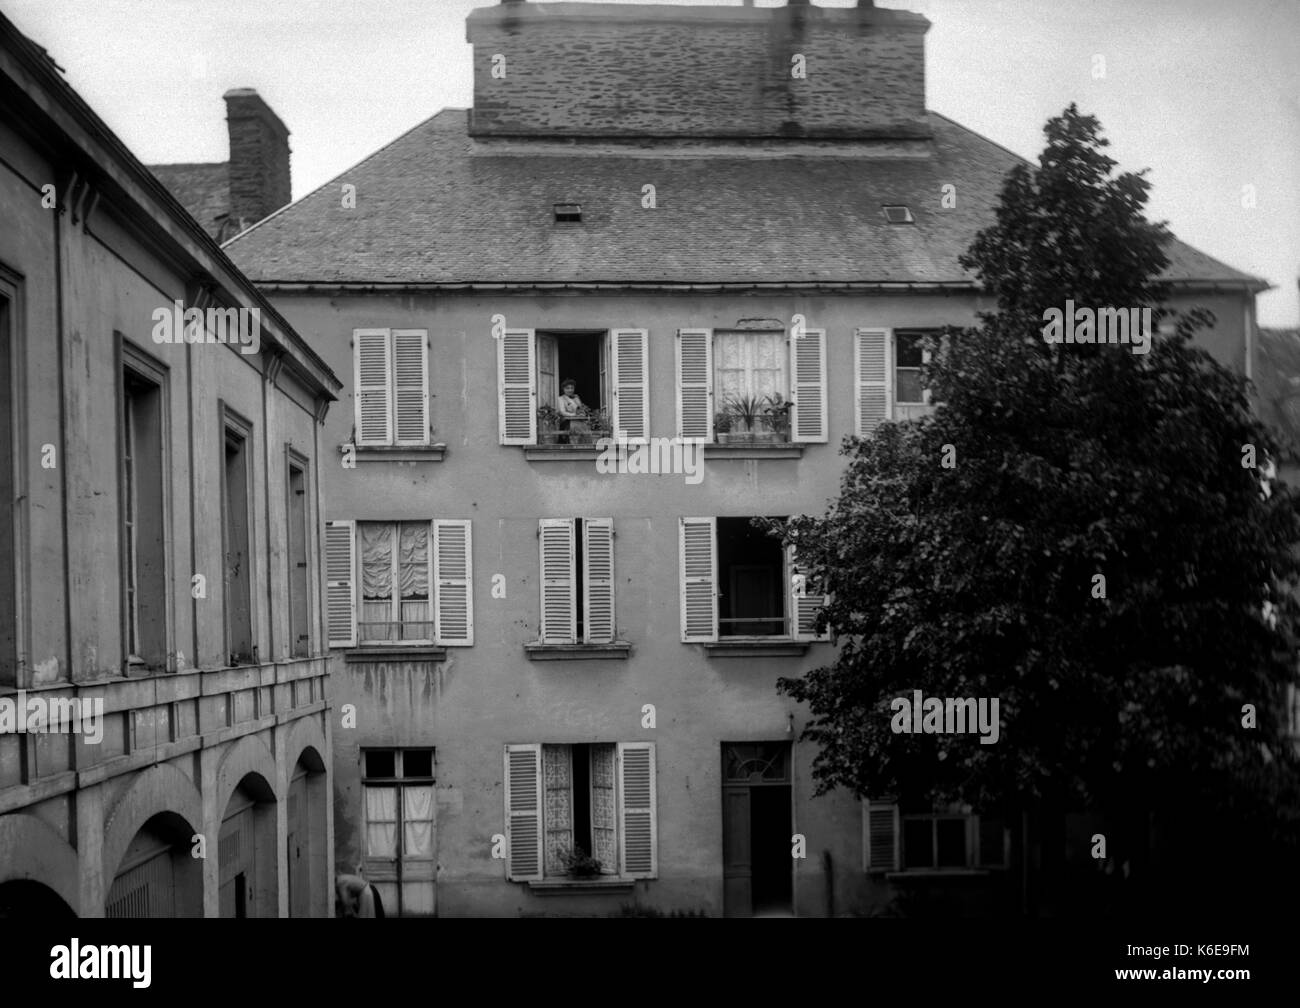 AJAXNETPHOTO. 1891-1910 (APPROX).SAINT-LO REGION, NORMANDY, FRANCE. - FRENCH RESIDENTIAL SHUTTERED WINDOW PROPERTY WITH A WOMAN LOOKING OUT FROM THE TOP FLOOR. PHOTOGRAPHER:UNKNOWN © DIGITAL IMAGE COPYRIGHT AJAX VINTAGE PICTURE LIBRARY SOURCE: AJAX VINTAGE PICTURE LIBRARY COLLECTION REF:AVL FRA 1890 08 Stock Photo